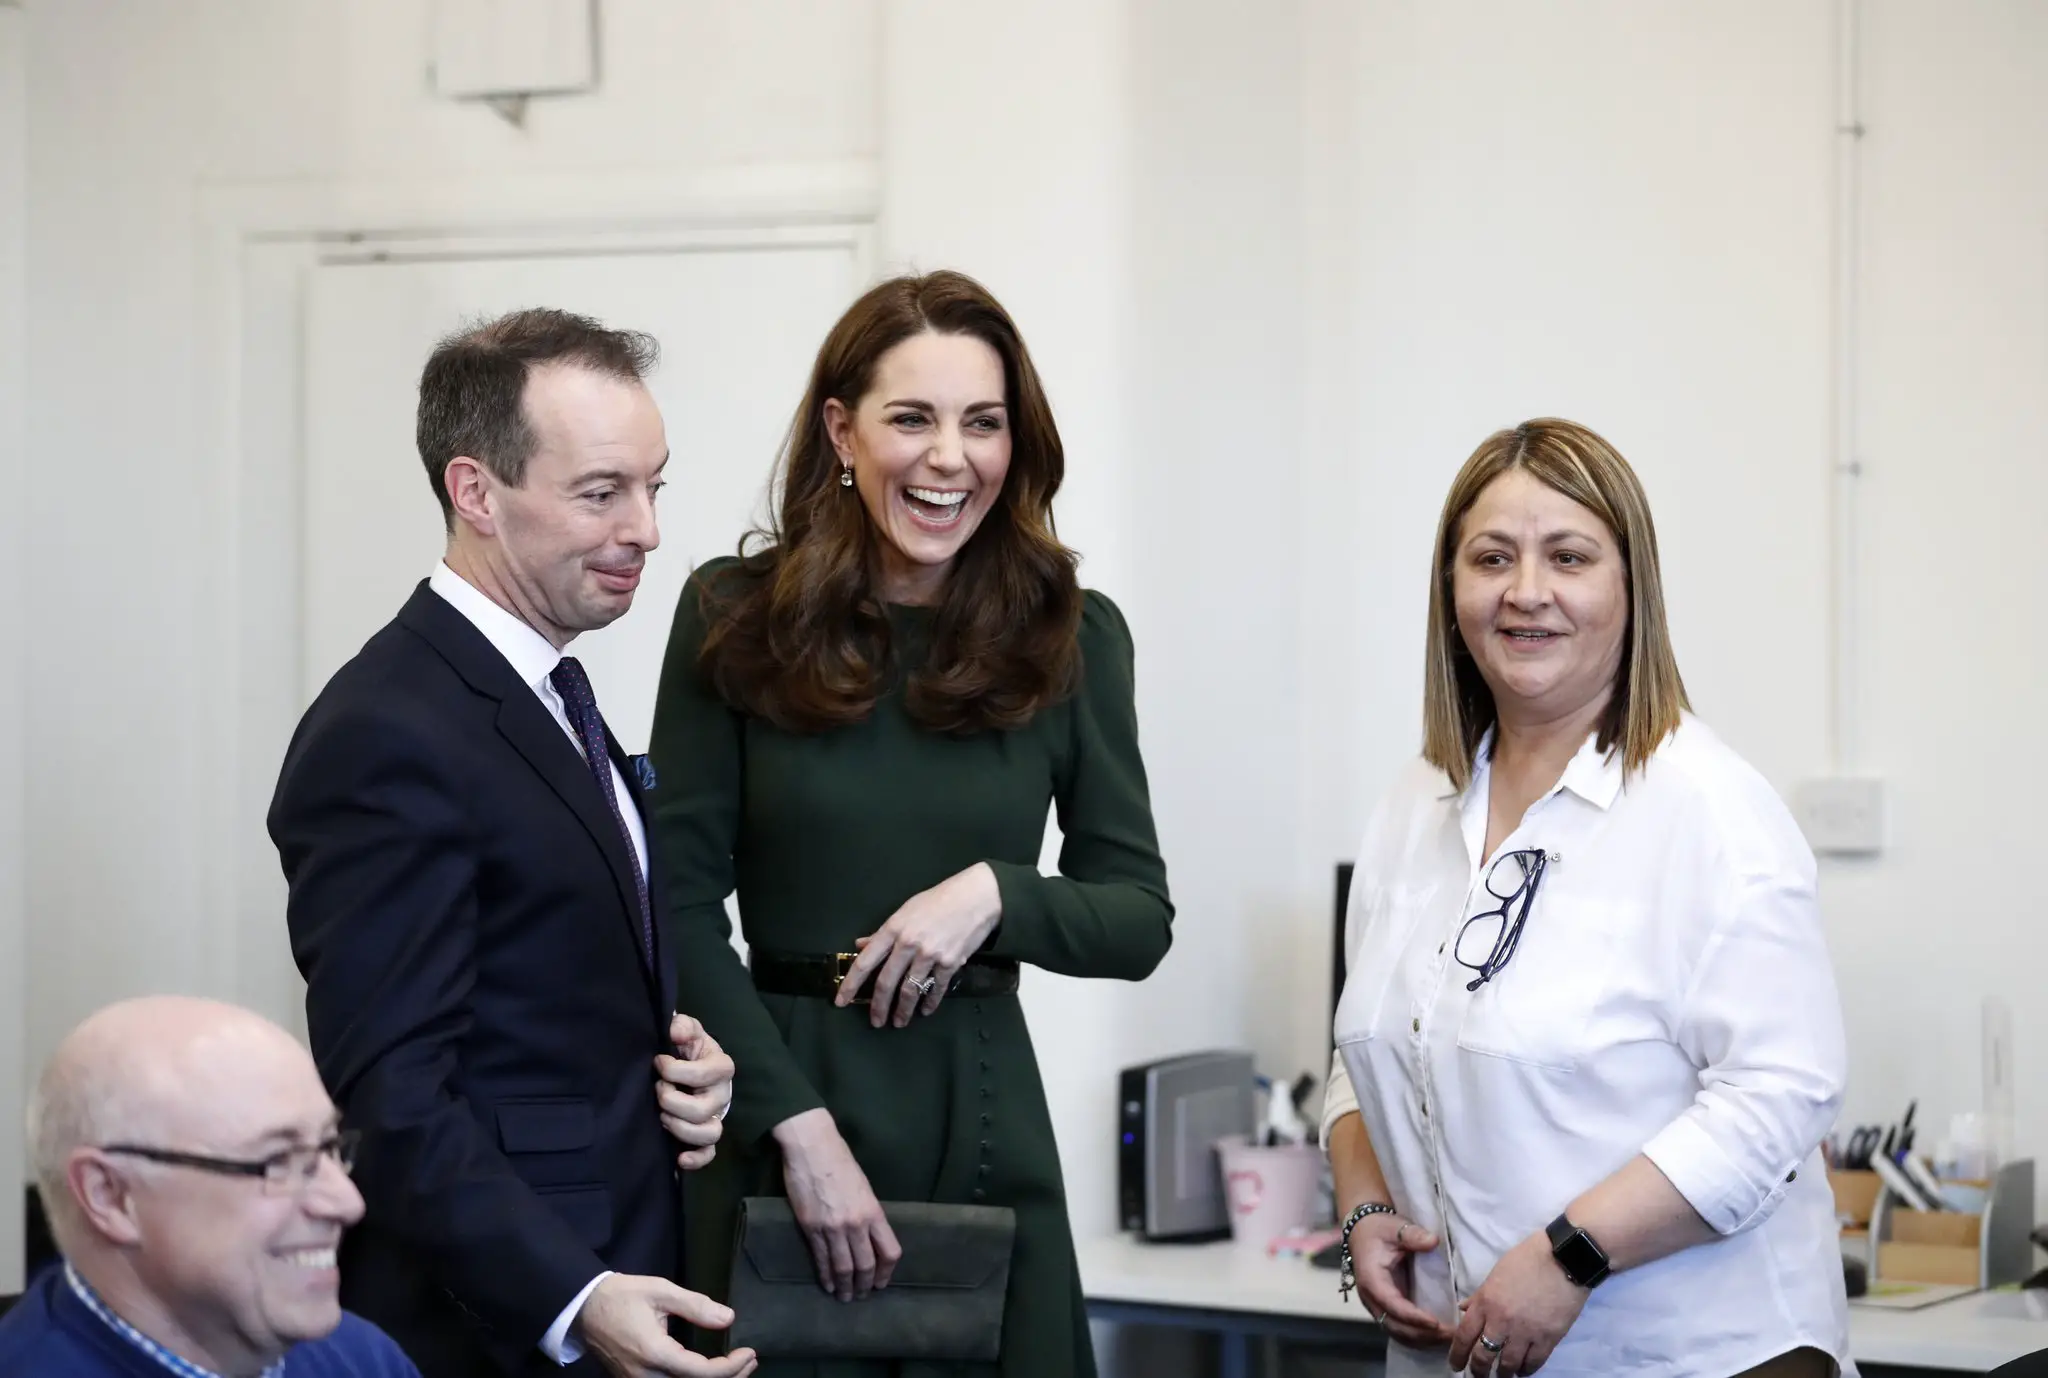 The Duchess of cambridge visited Family Action